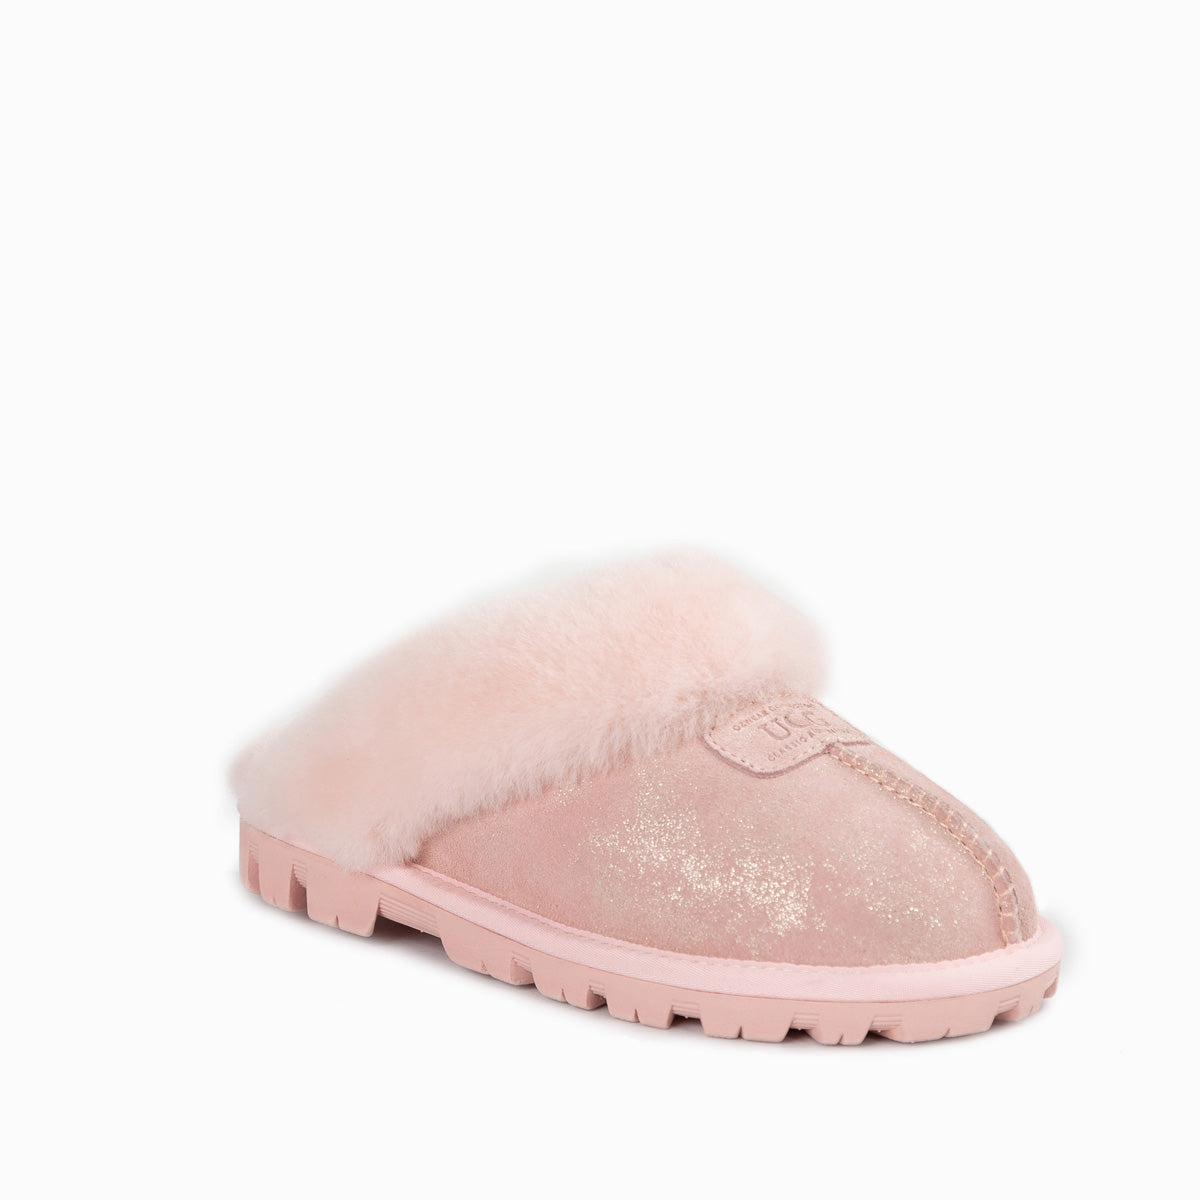 Ugg Coquette Slipper (Foil Print)(Water Resistant)